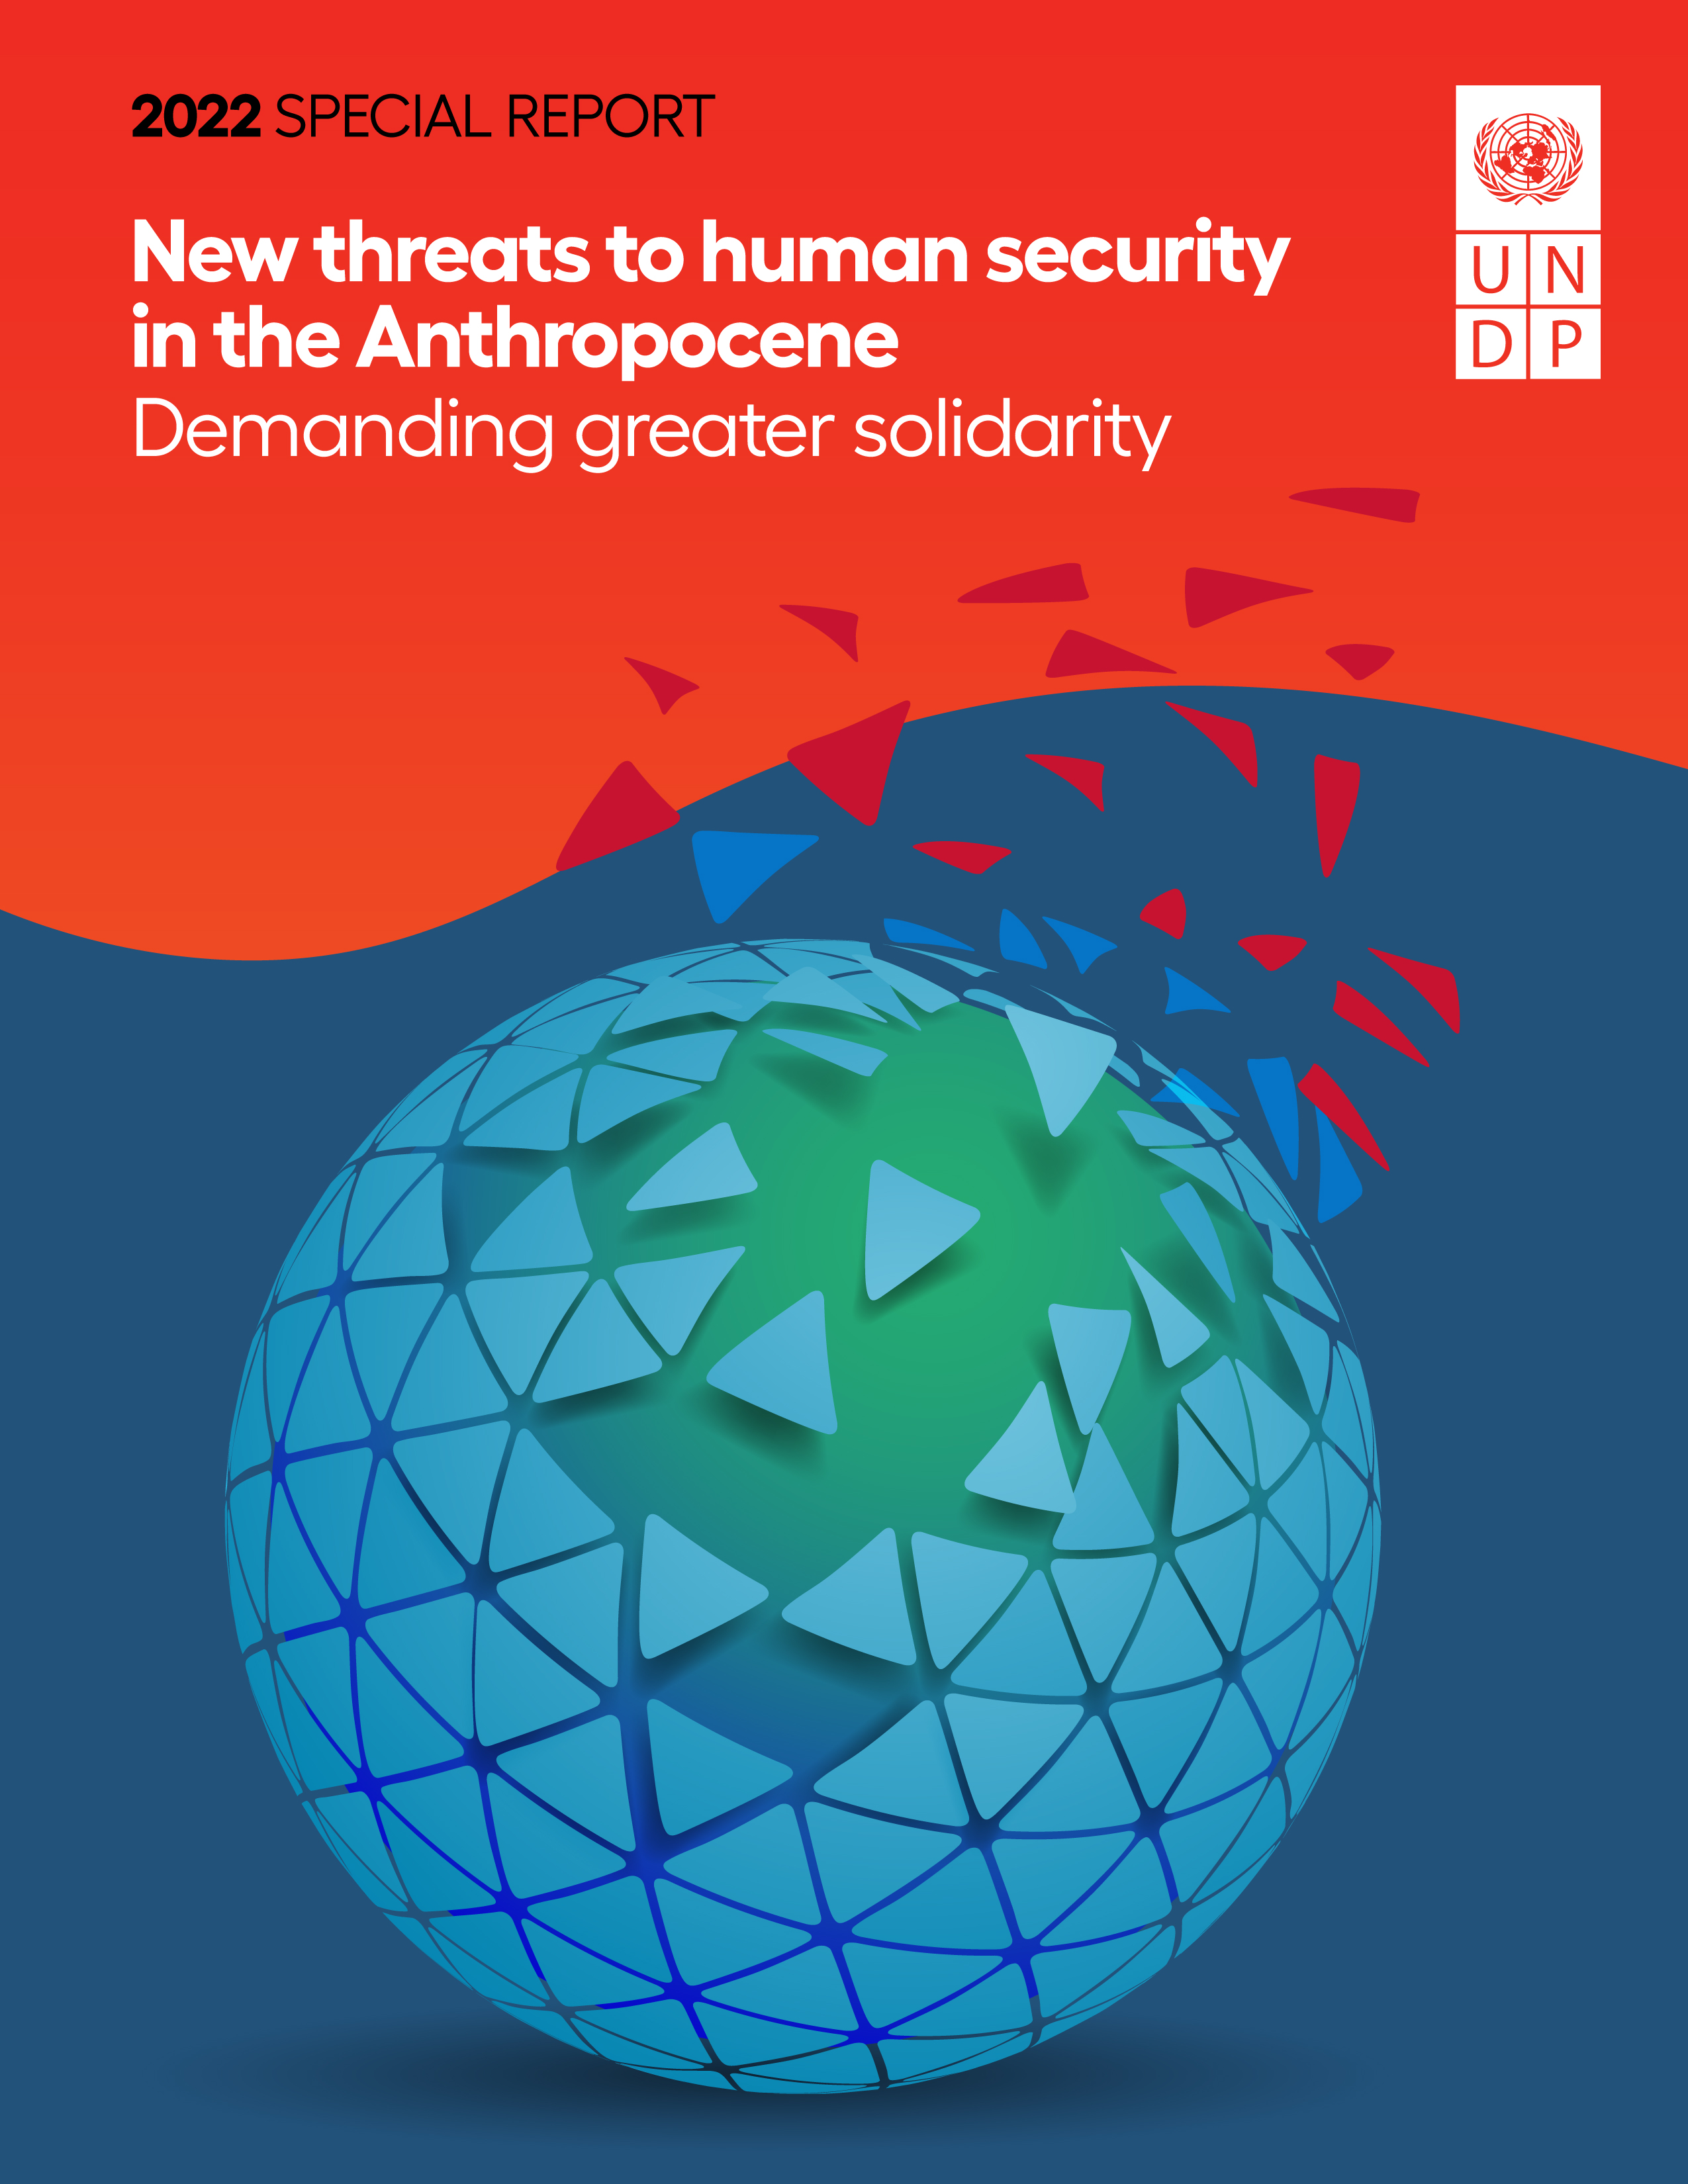 2022 Special Report on Human Security